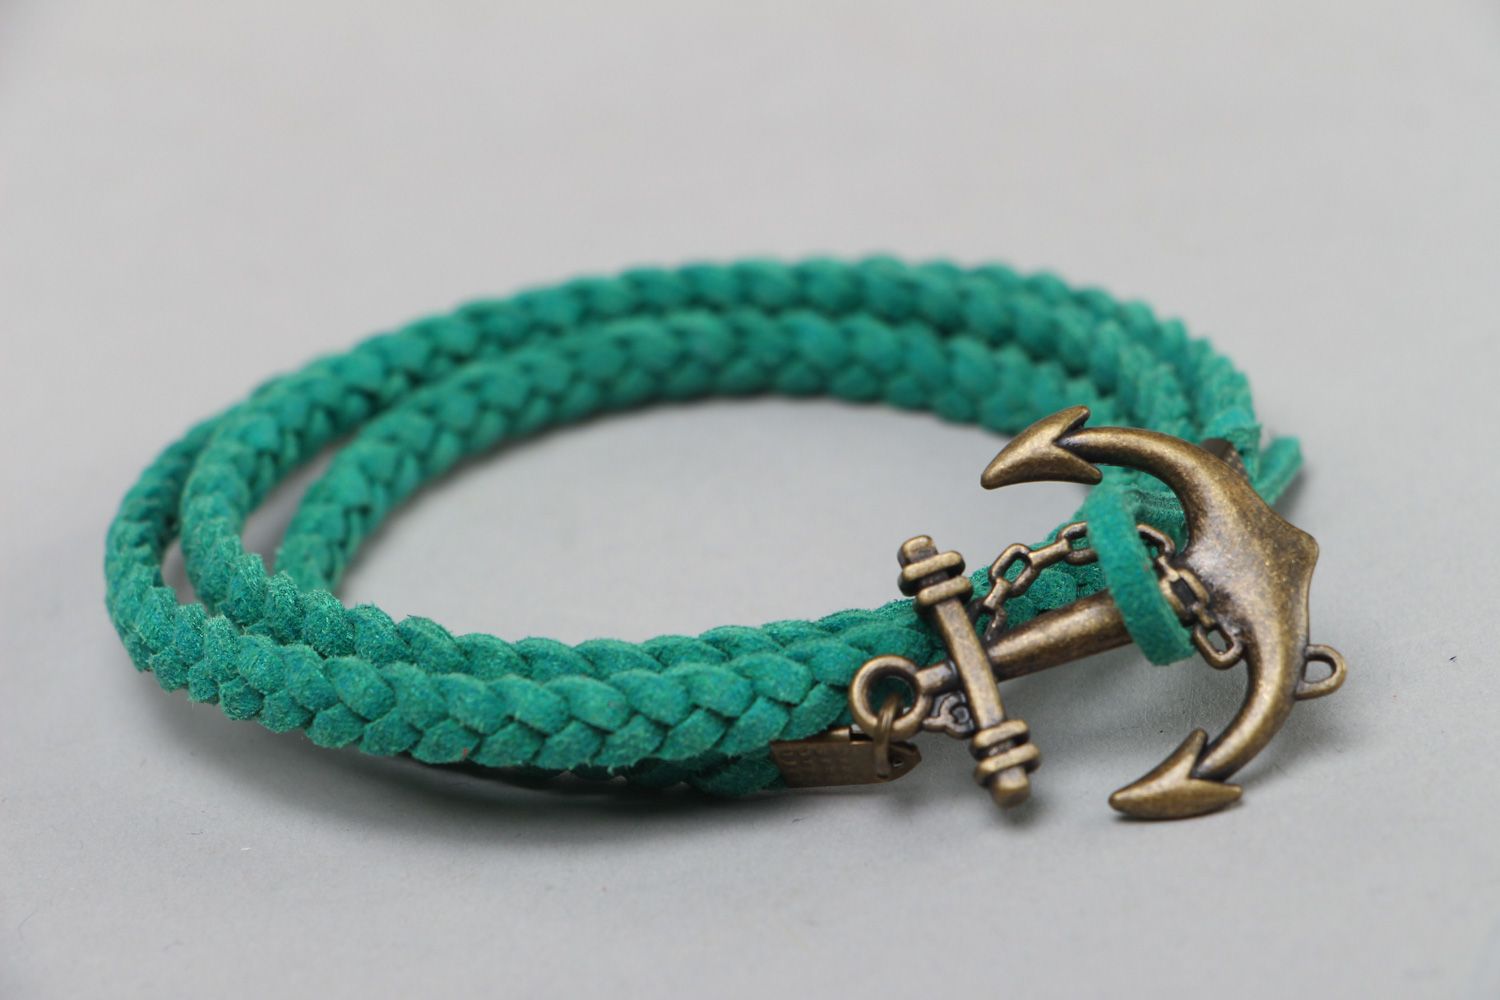 Handmade artificial suede cord bracelet with metal charm photo 1